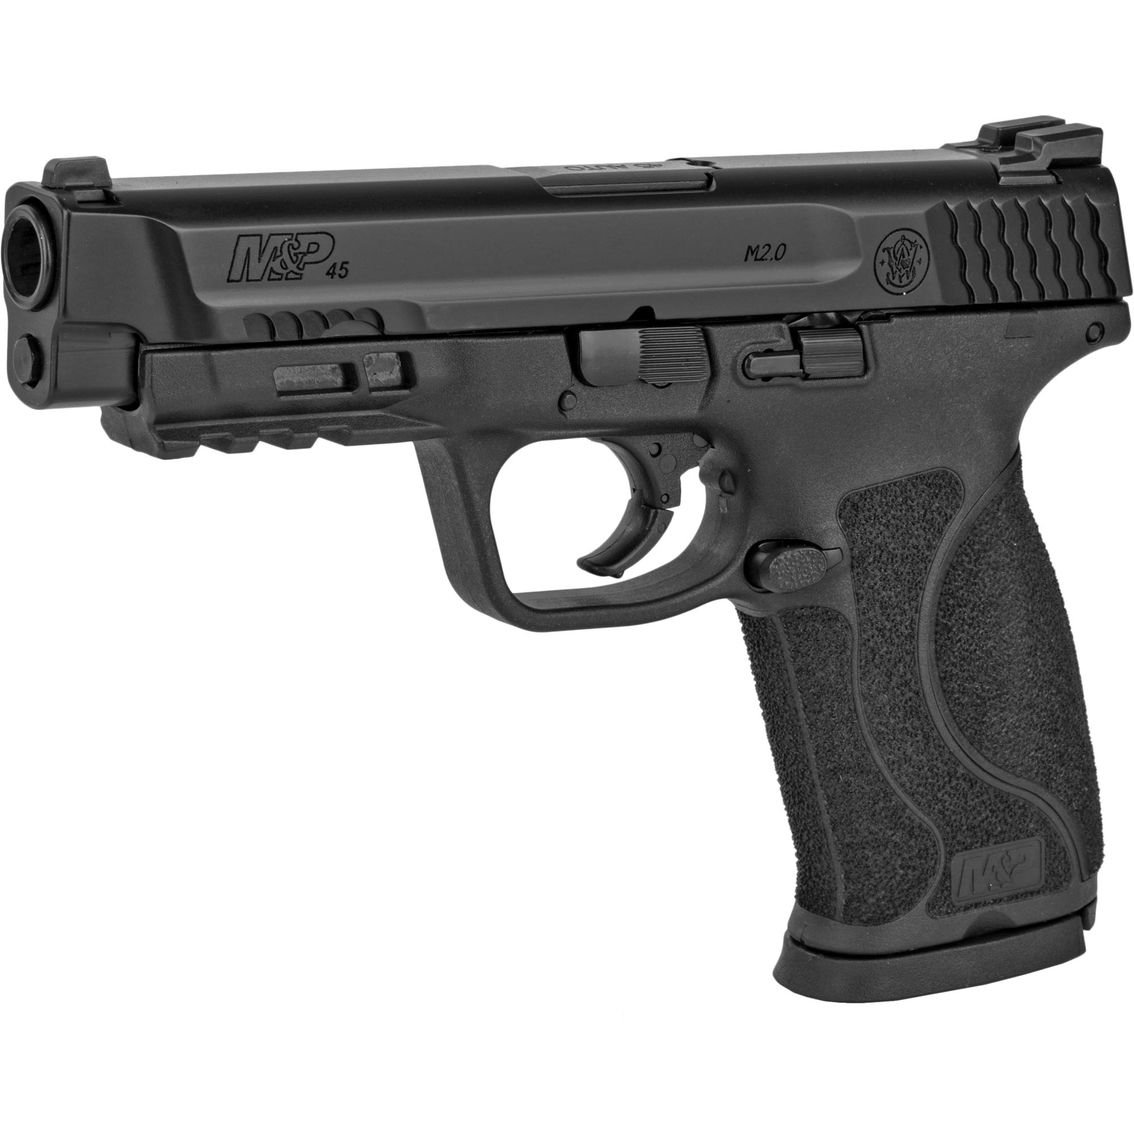 S&W M&P 2.0 45 ACP 4.6 in. Barrel 10 Rds 3-Mags Pistol Black - Image 3 of 3